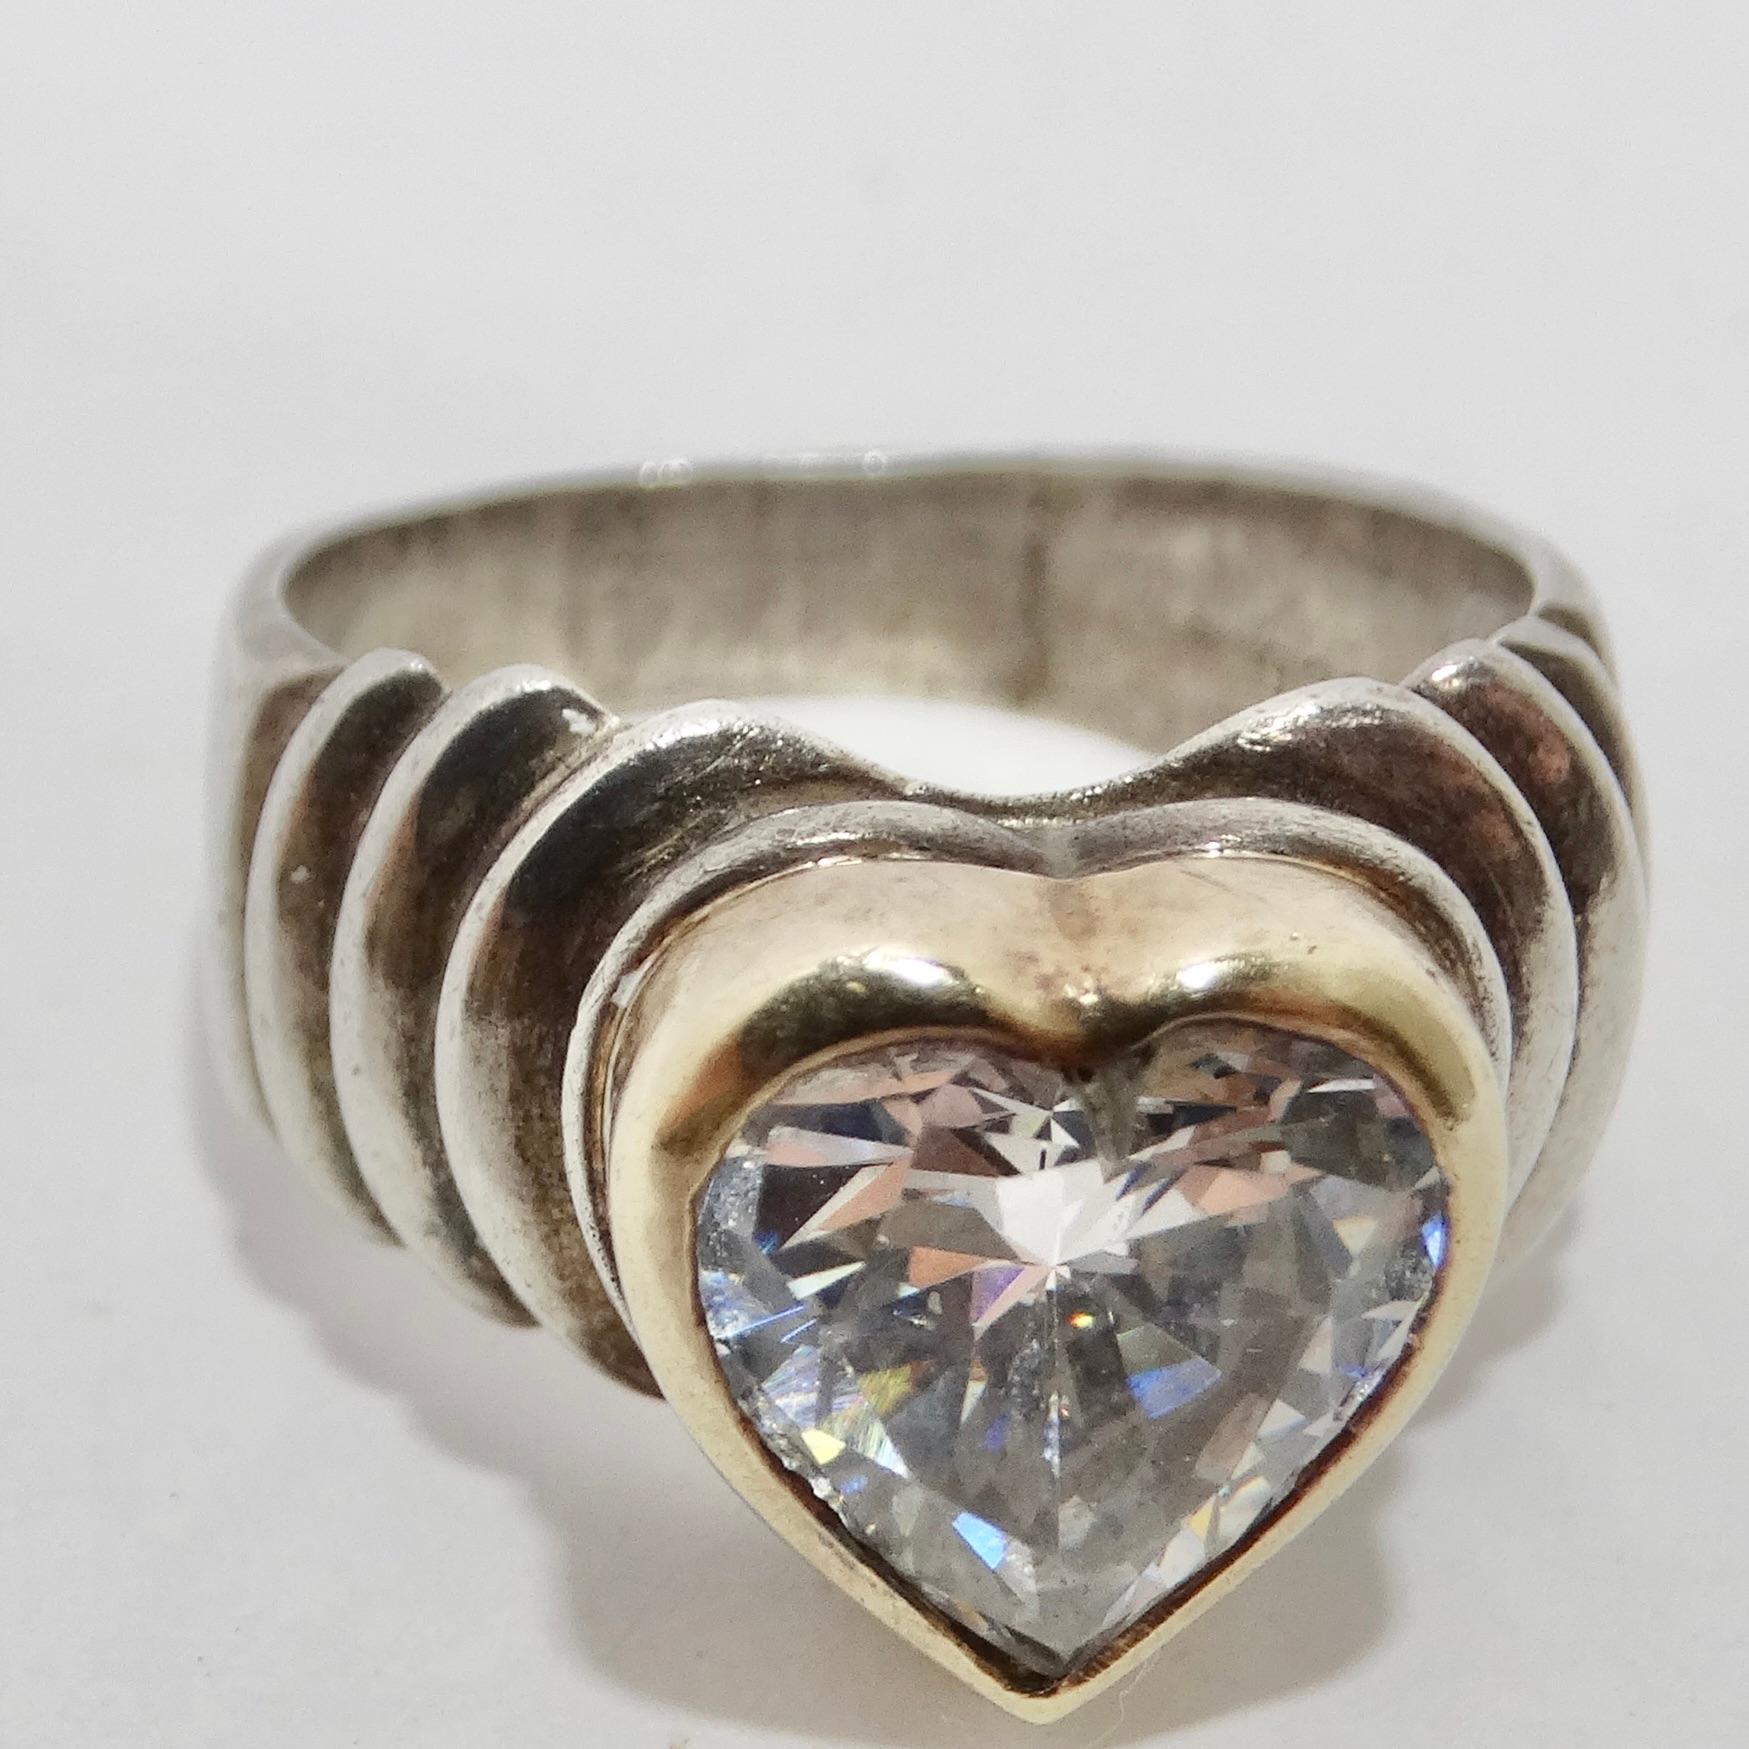 Introducing our 18K Gold and Silver Rhinestone Heart Ring, a symbol of timeless elegance and everlasting love. This exquisite ring merges the beauty of silver and gold with a hint of flirtatious femininity. The silver textured band serves as a